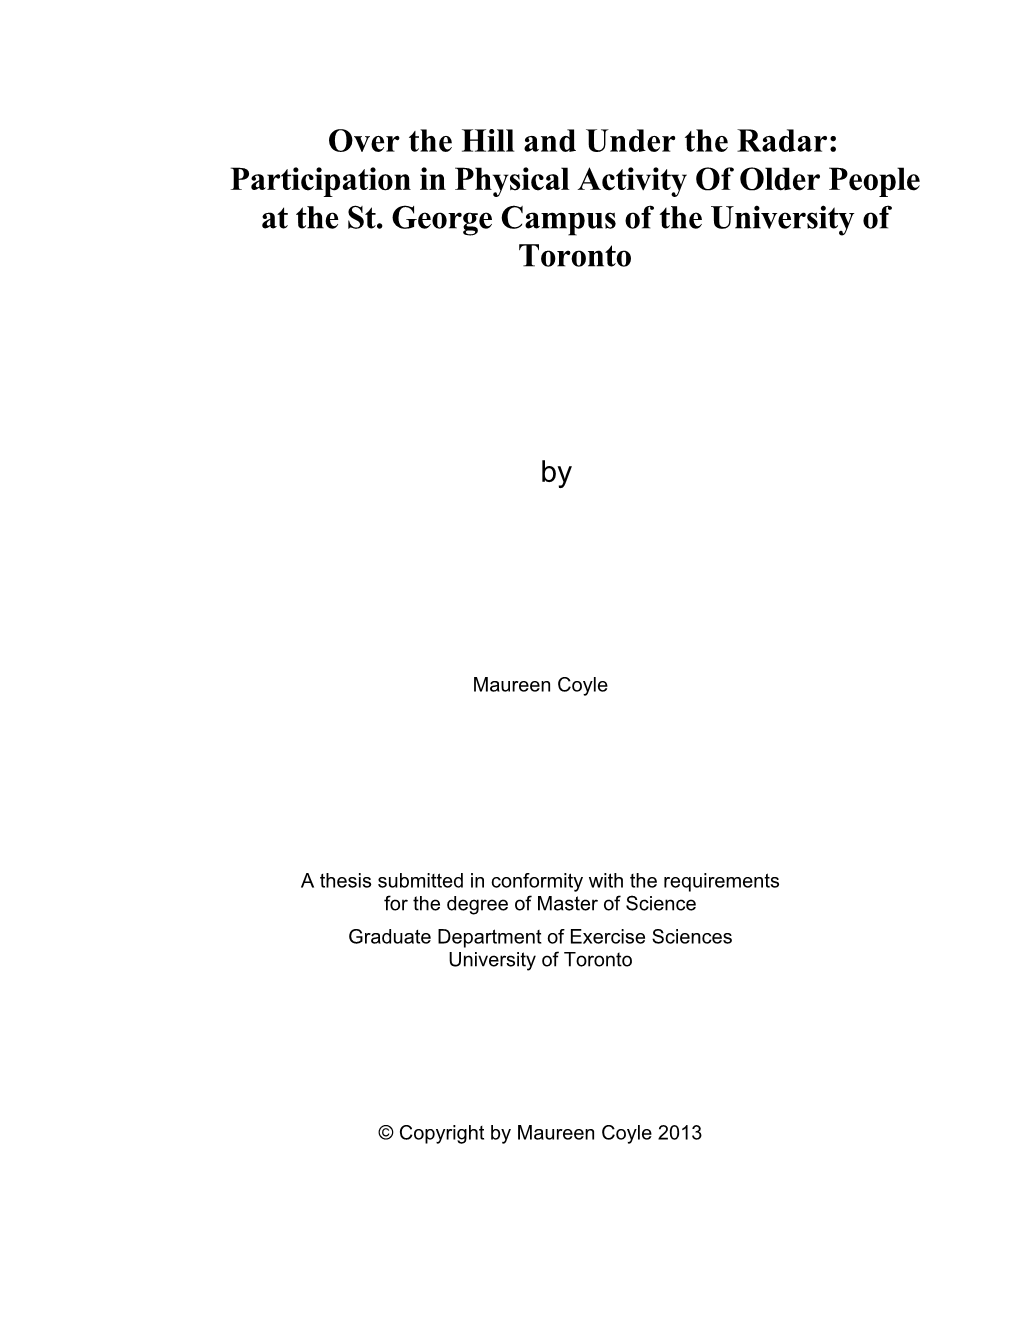 Participation in Physical Activity of Older People at the St